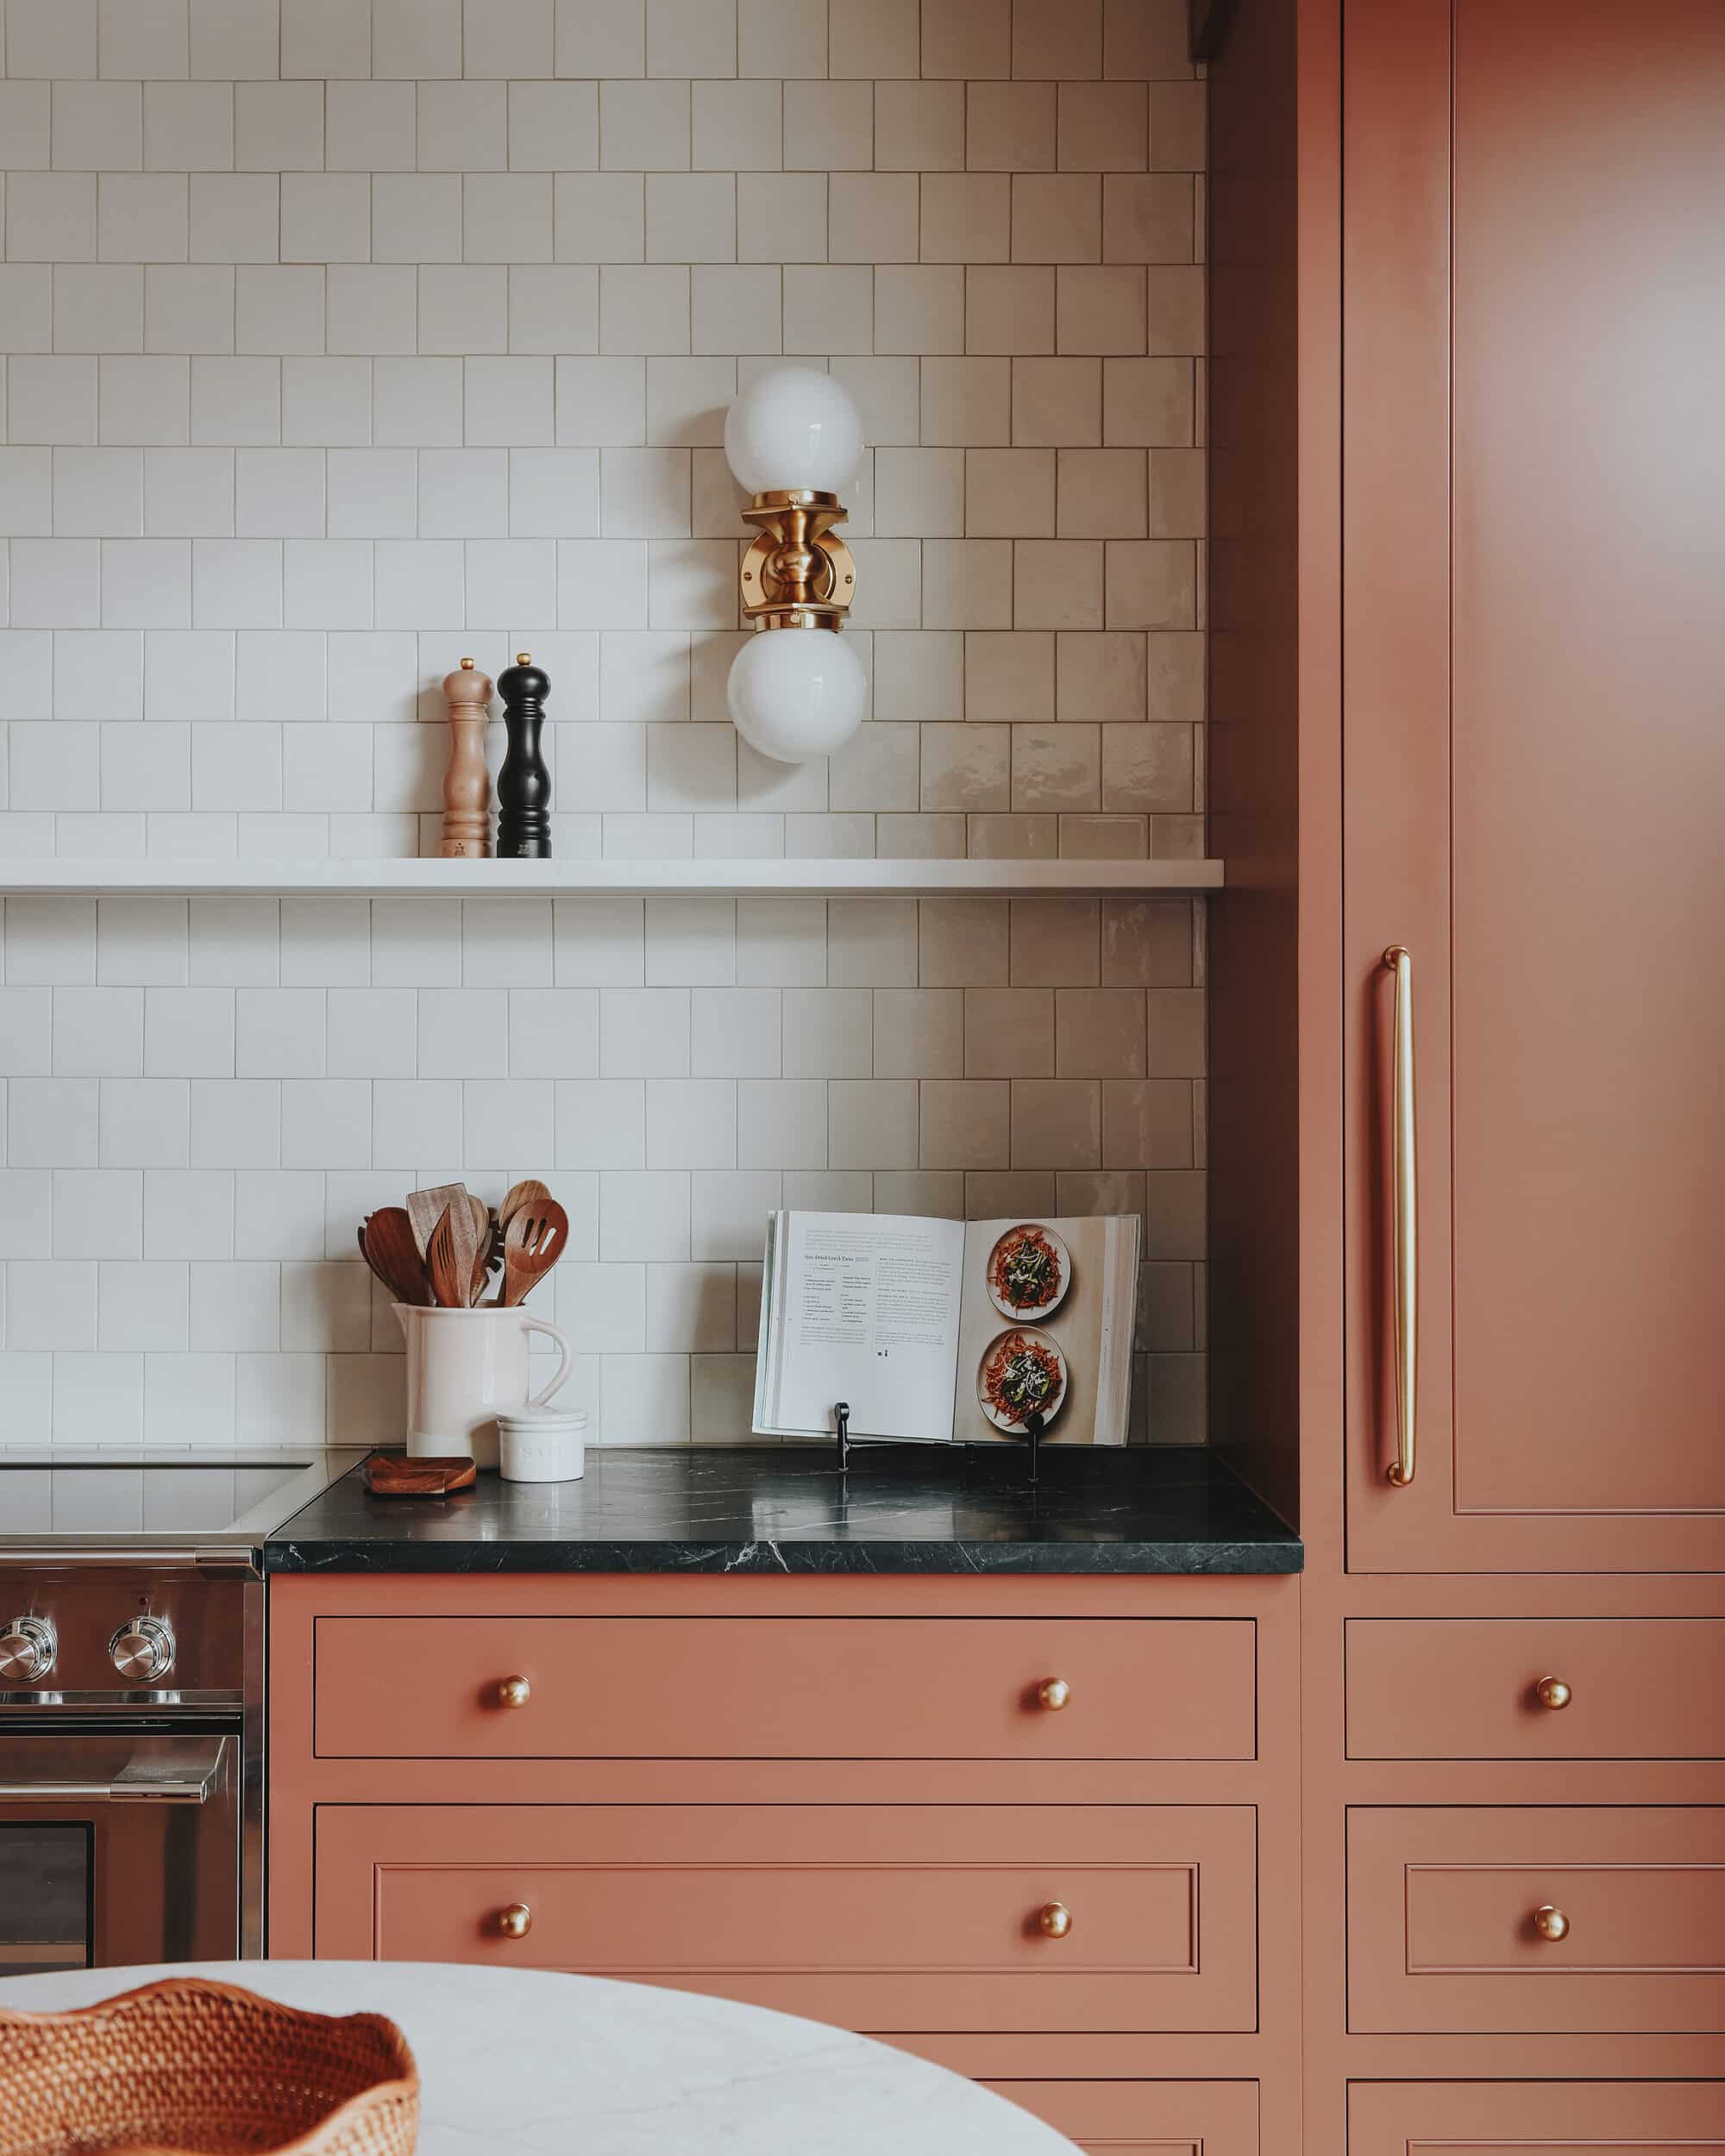 Pix Bianco tile and Irish Creme grout compliment the cabinets nicely // via Yellow Brick Home